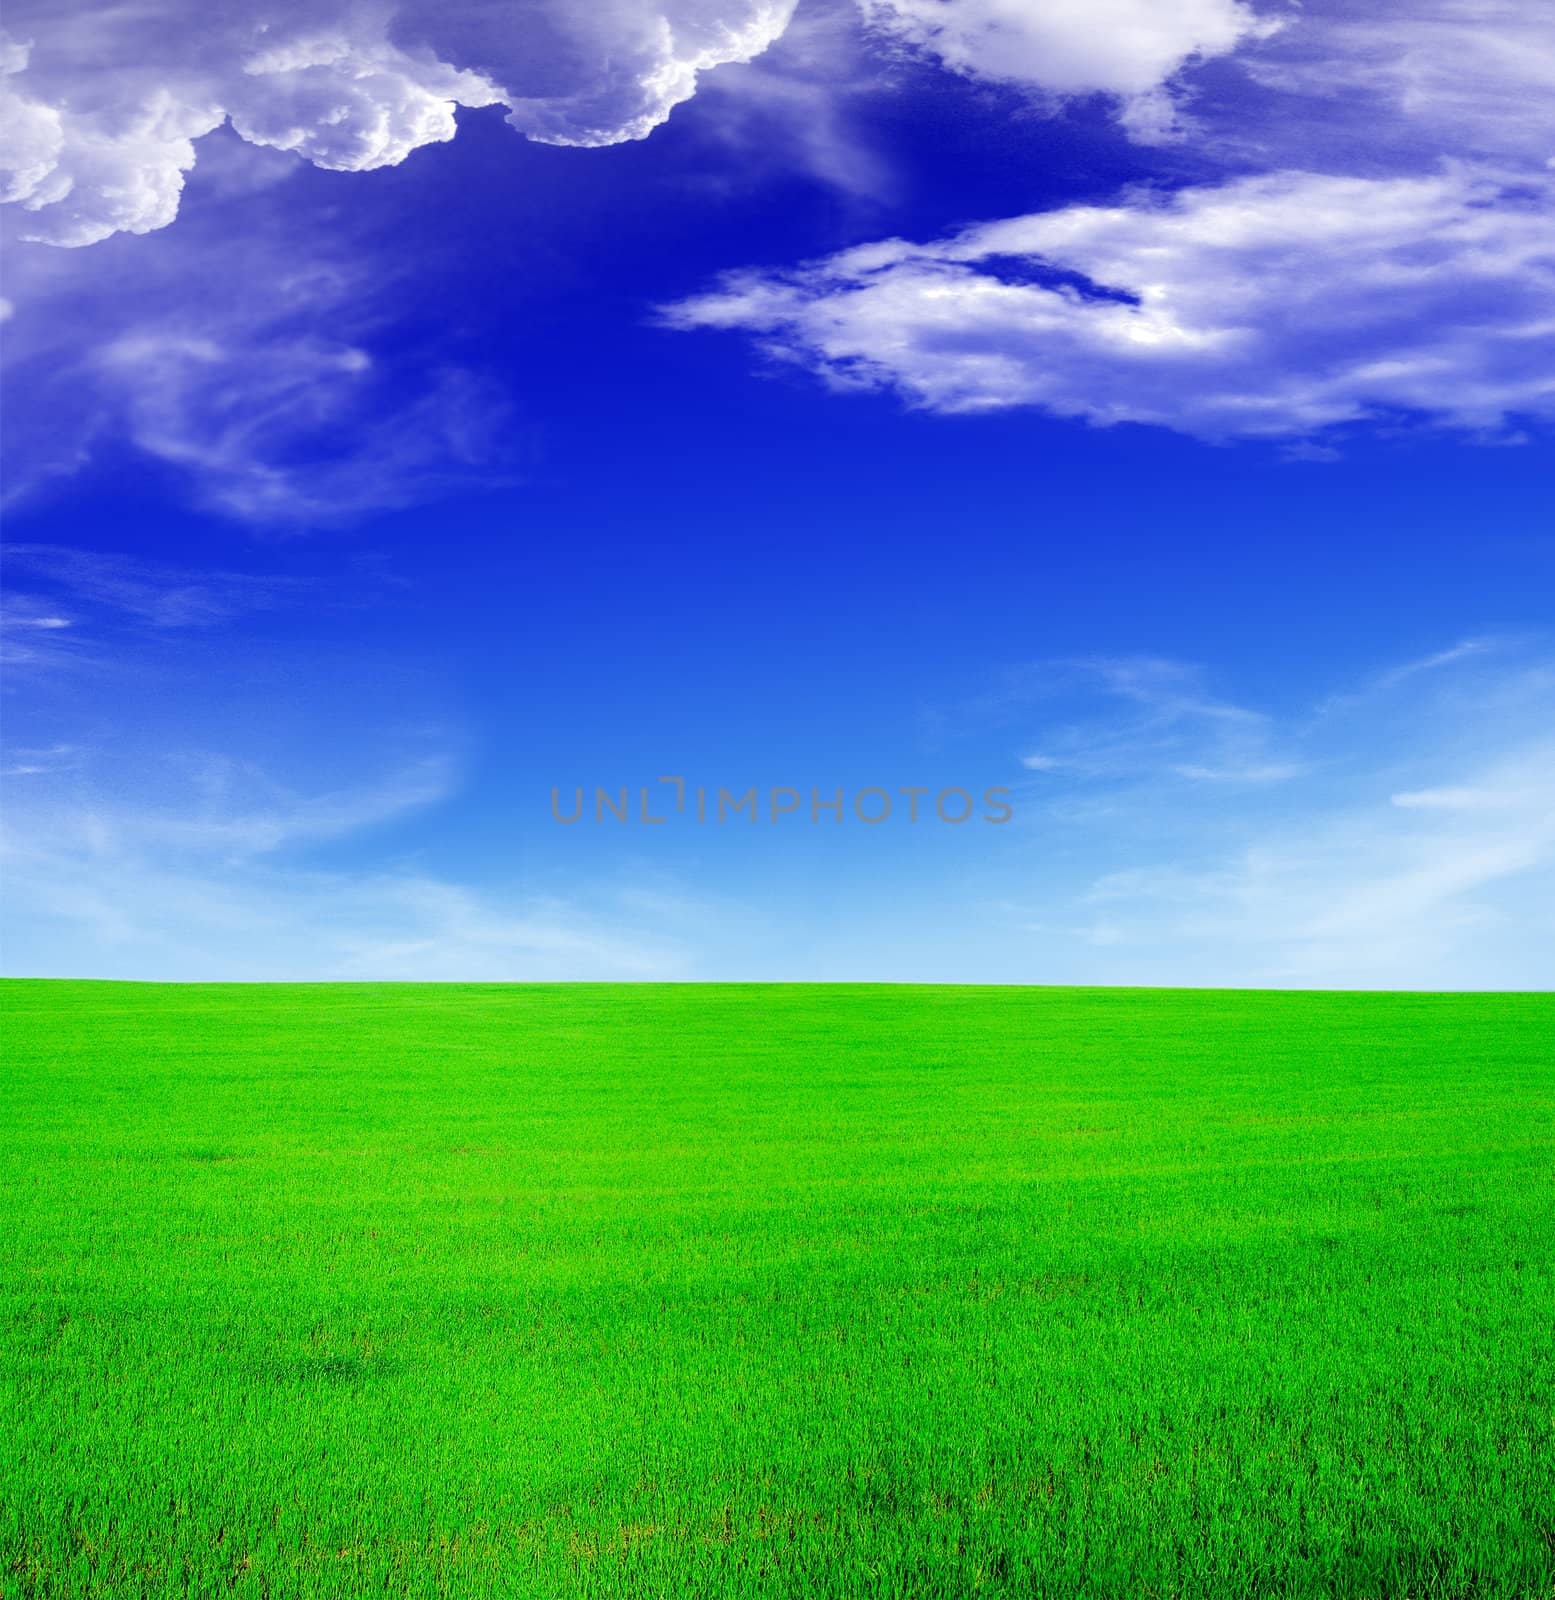 Summer landscape - blue sky and green field by rbv